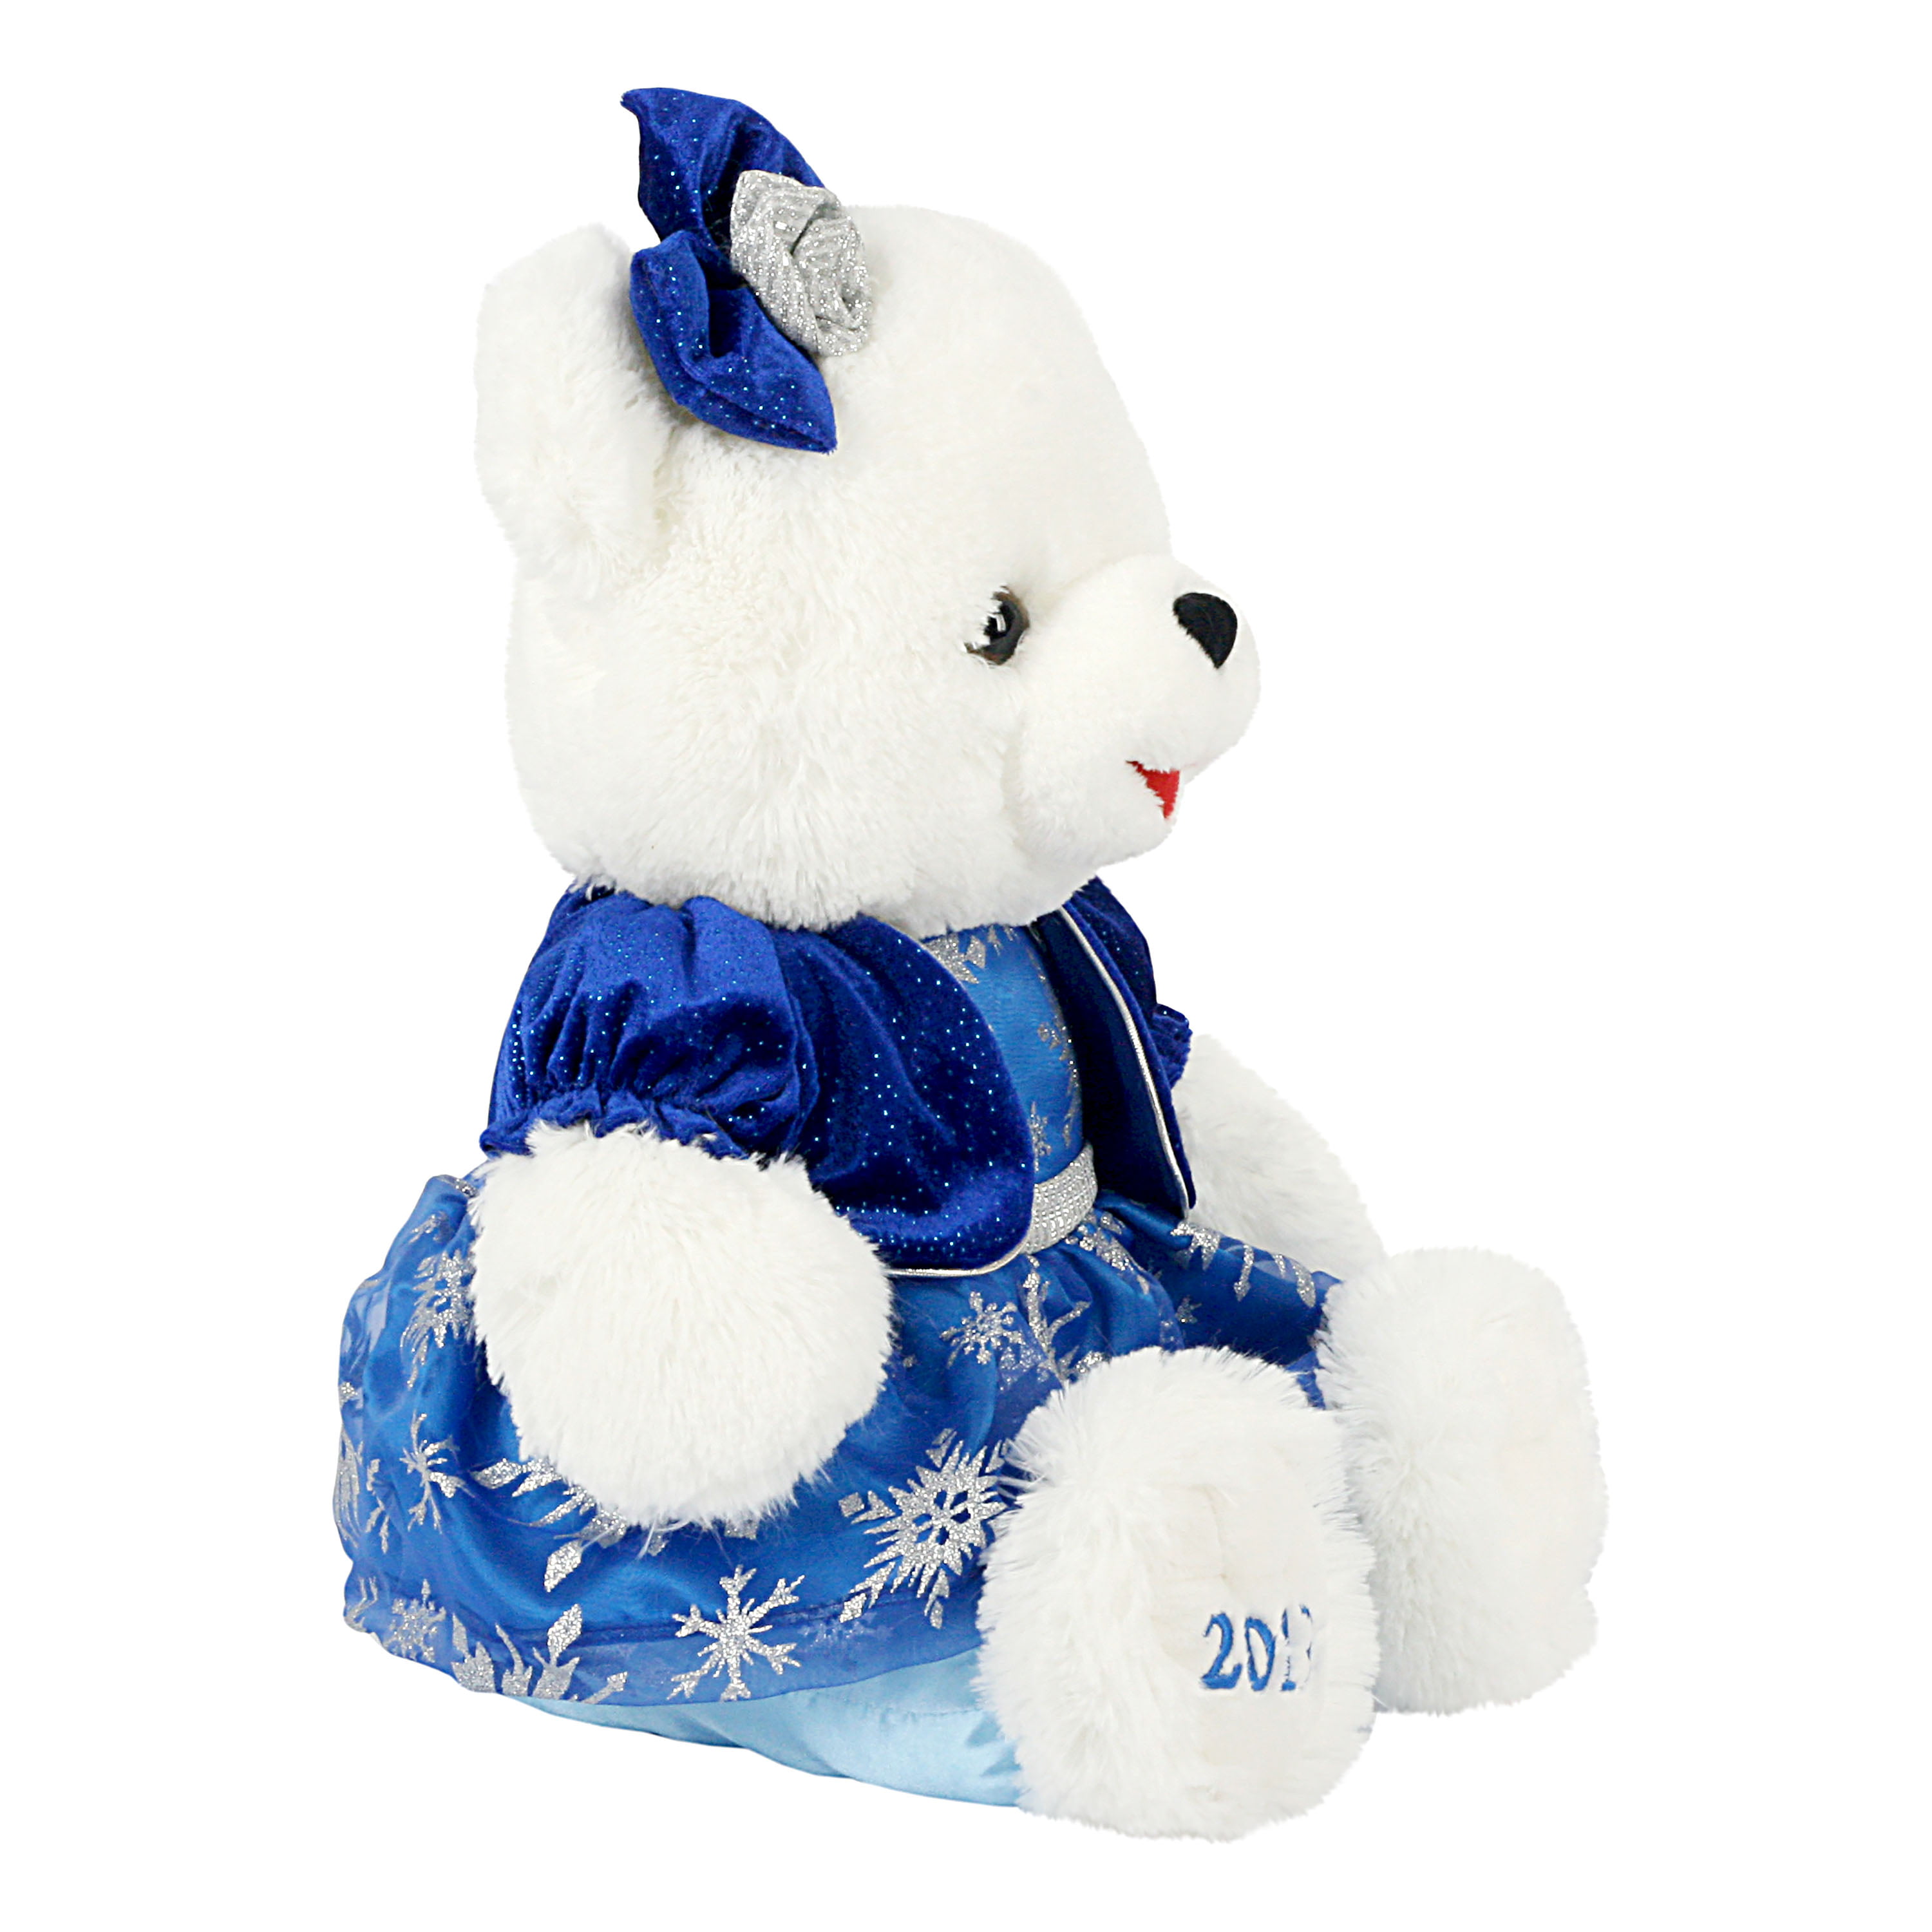 Details about   Trim A Home 2016 White Teddy Bear in Blue Outfit Resin Christmas Ornament NWT 